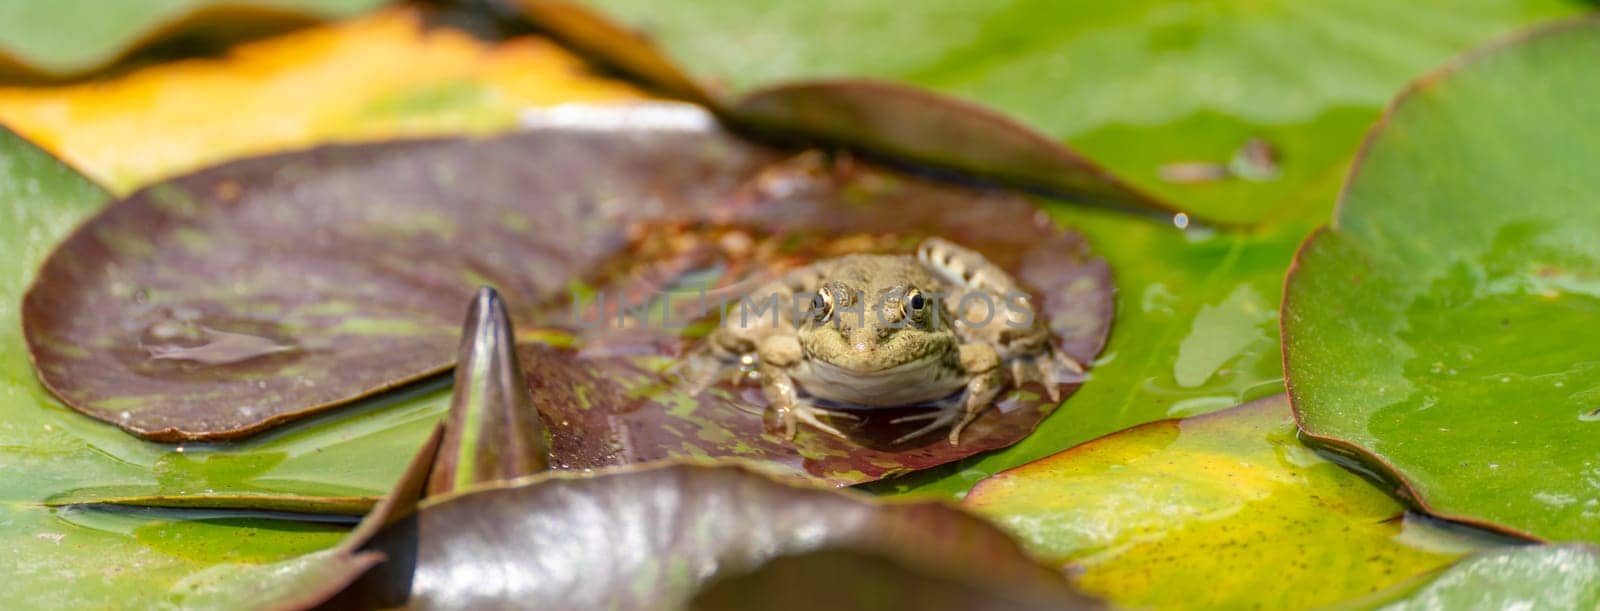 frog leaf water lily banner. A small green frog is sitting at the edge of water lily leaves in a pond.